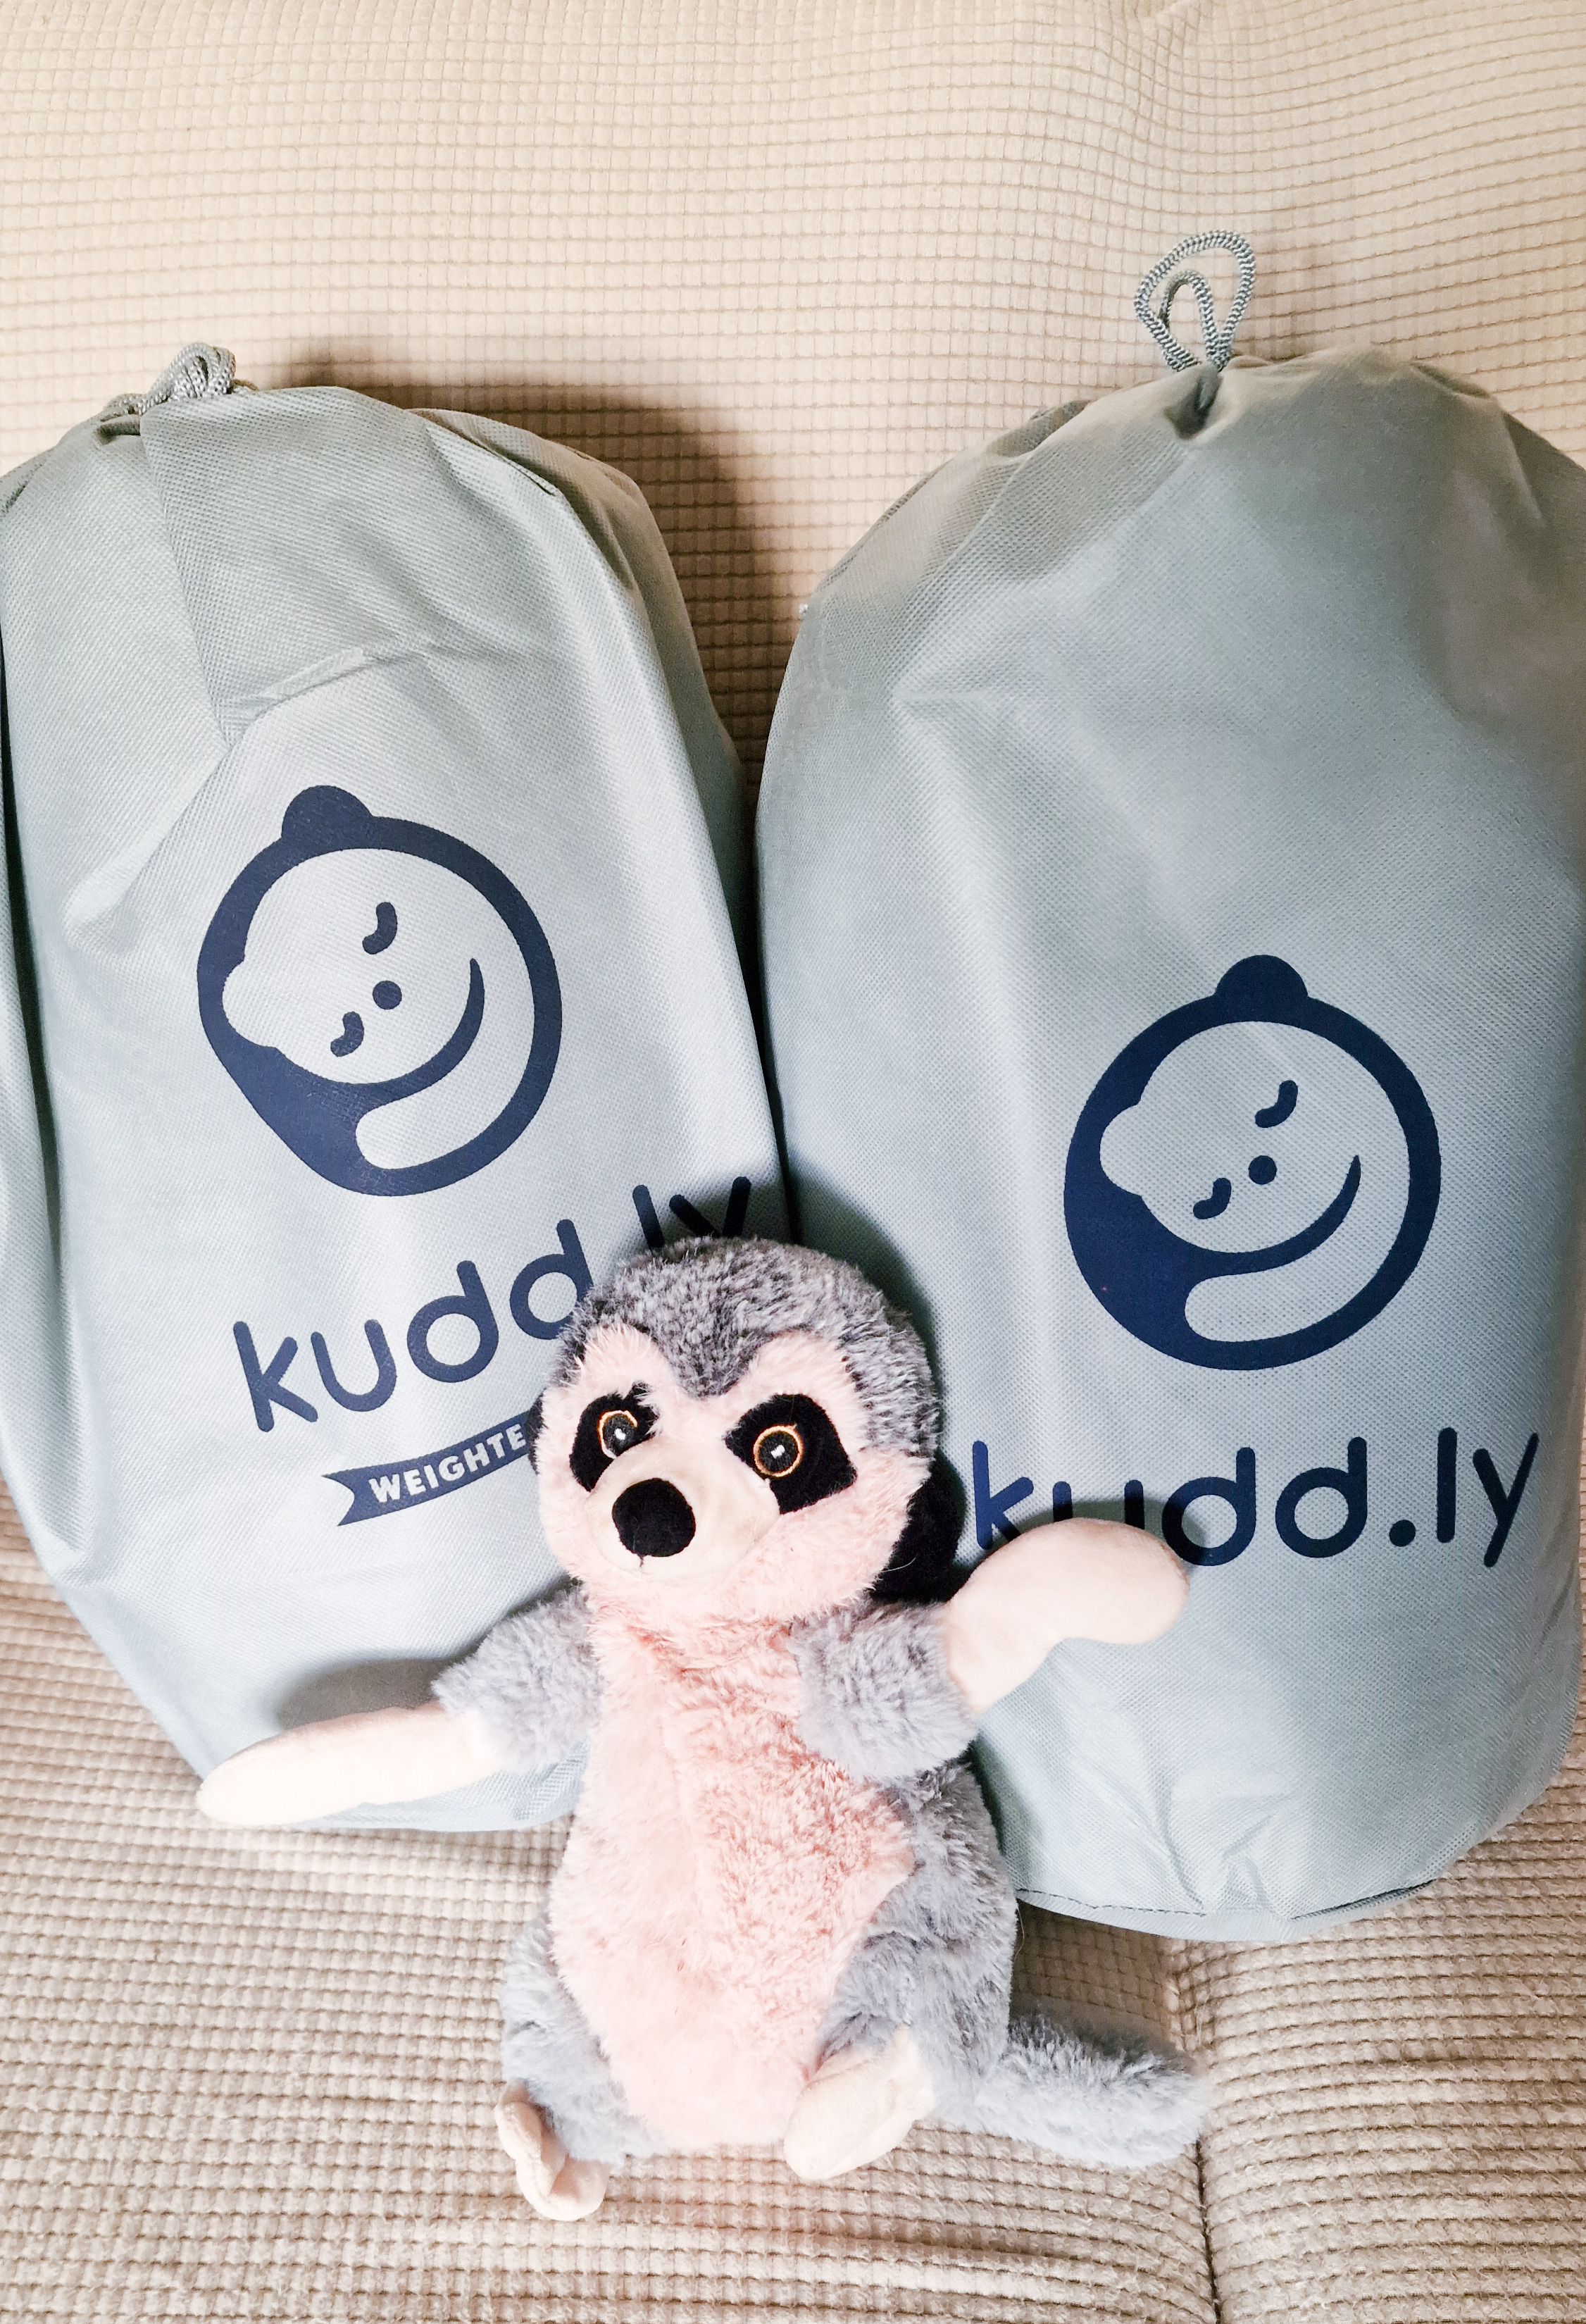 An image of two weighted blankets, still in their bags from delivery. The bags are grey and have a logo that looks like a sleepy bear cuddling, and the text reads &quot;Kuddly weighted blanket&quot;